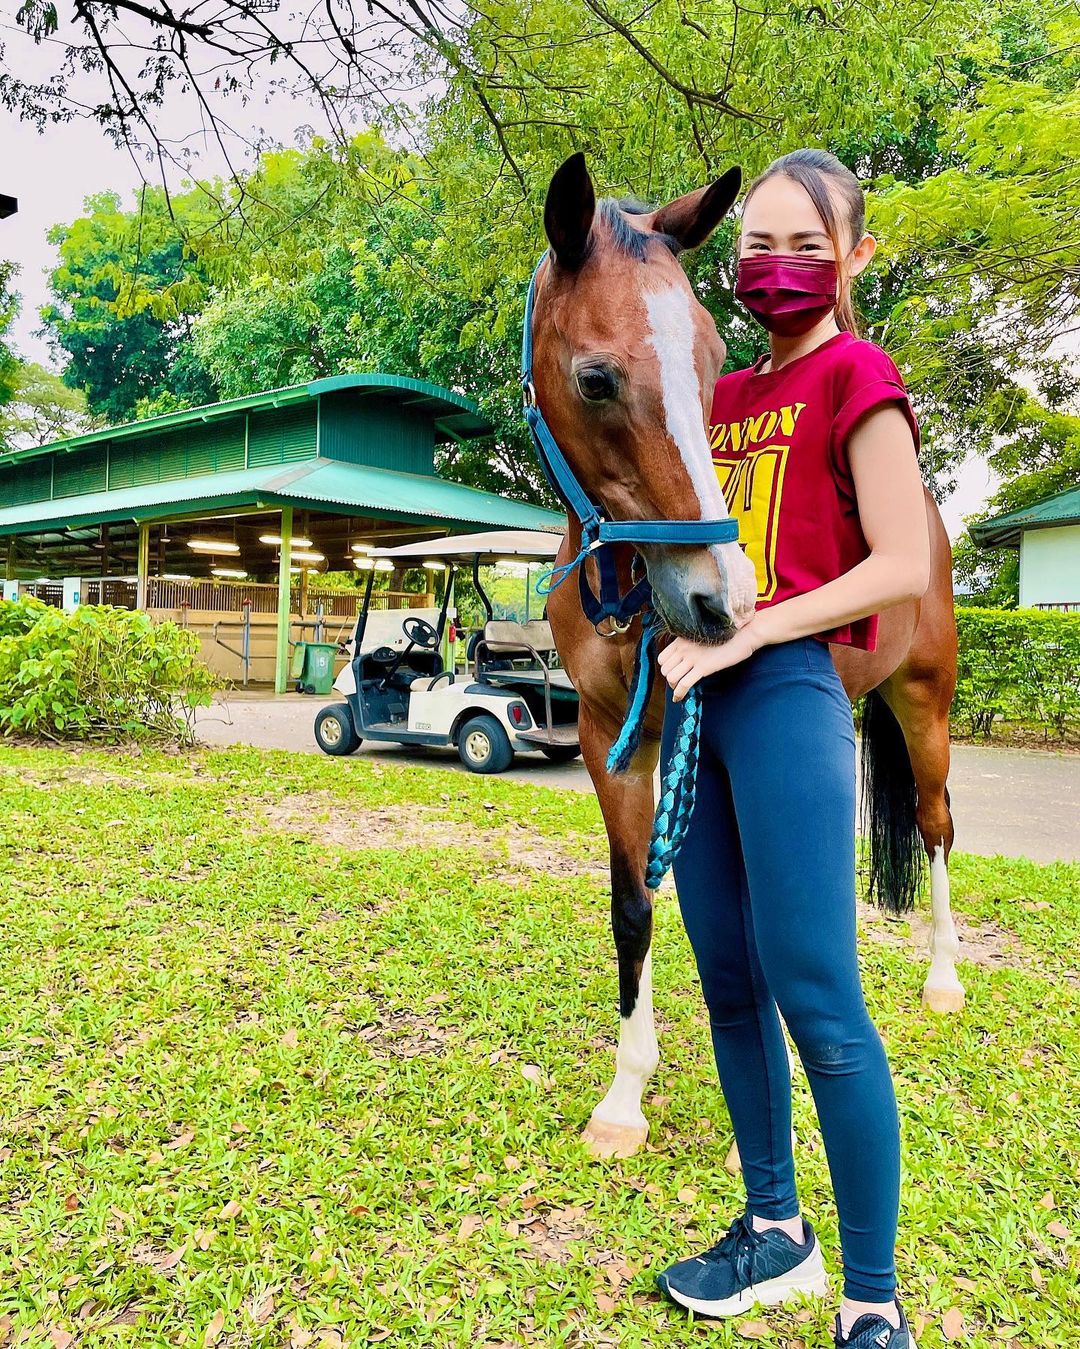 new things to do december 2021 - horse riding experience - Singapore Turf Club Riding Centre